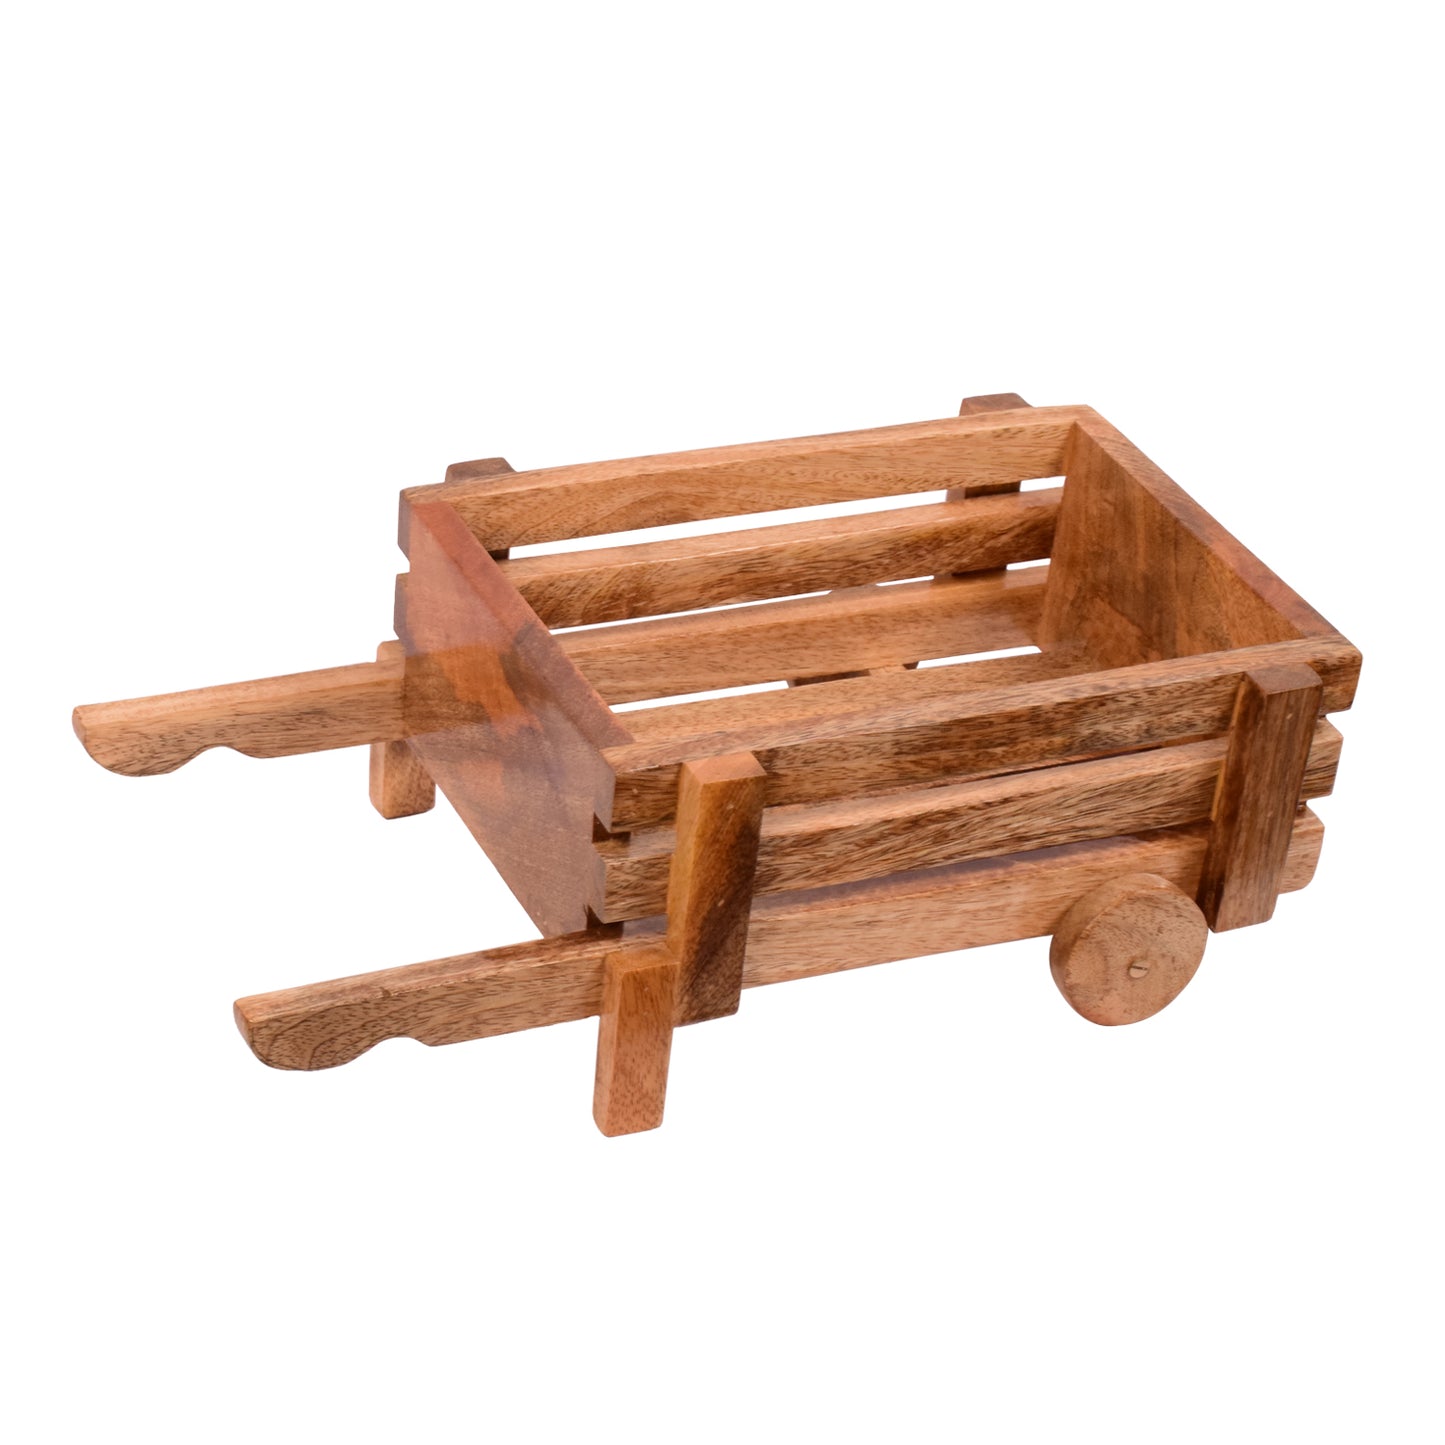 The Weaver's Nest Solid Wood Table Utility Cart